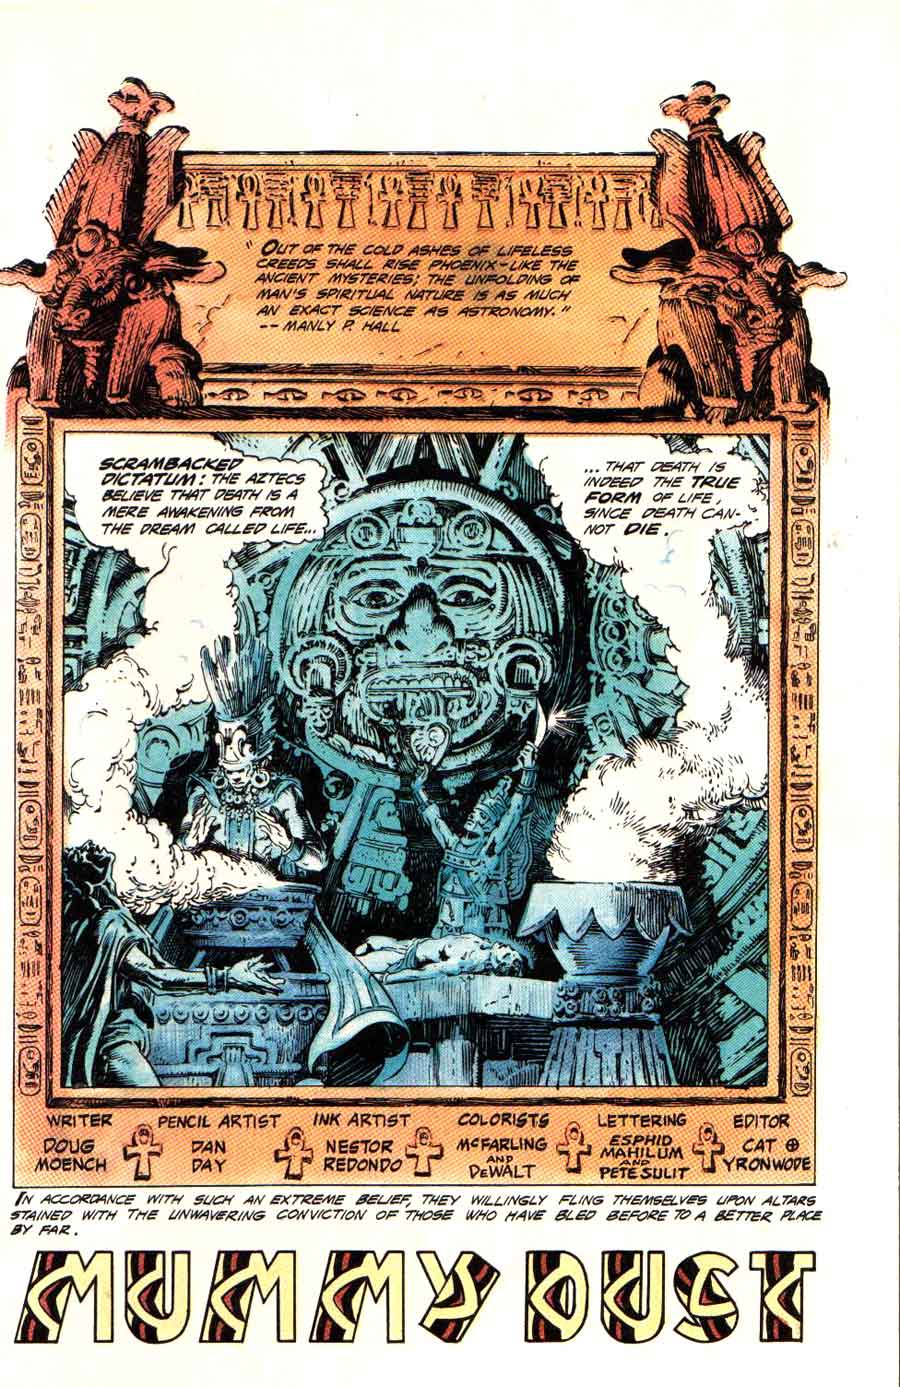 Aztec Ace #3 Eclipse 1980s comic book page by Nestor Redondo